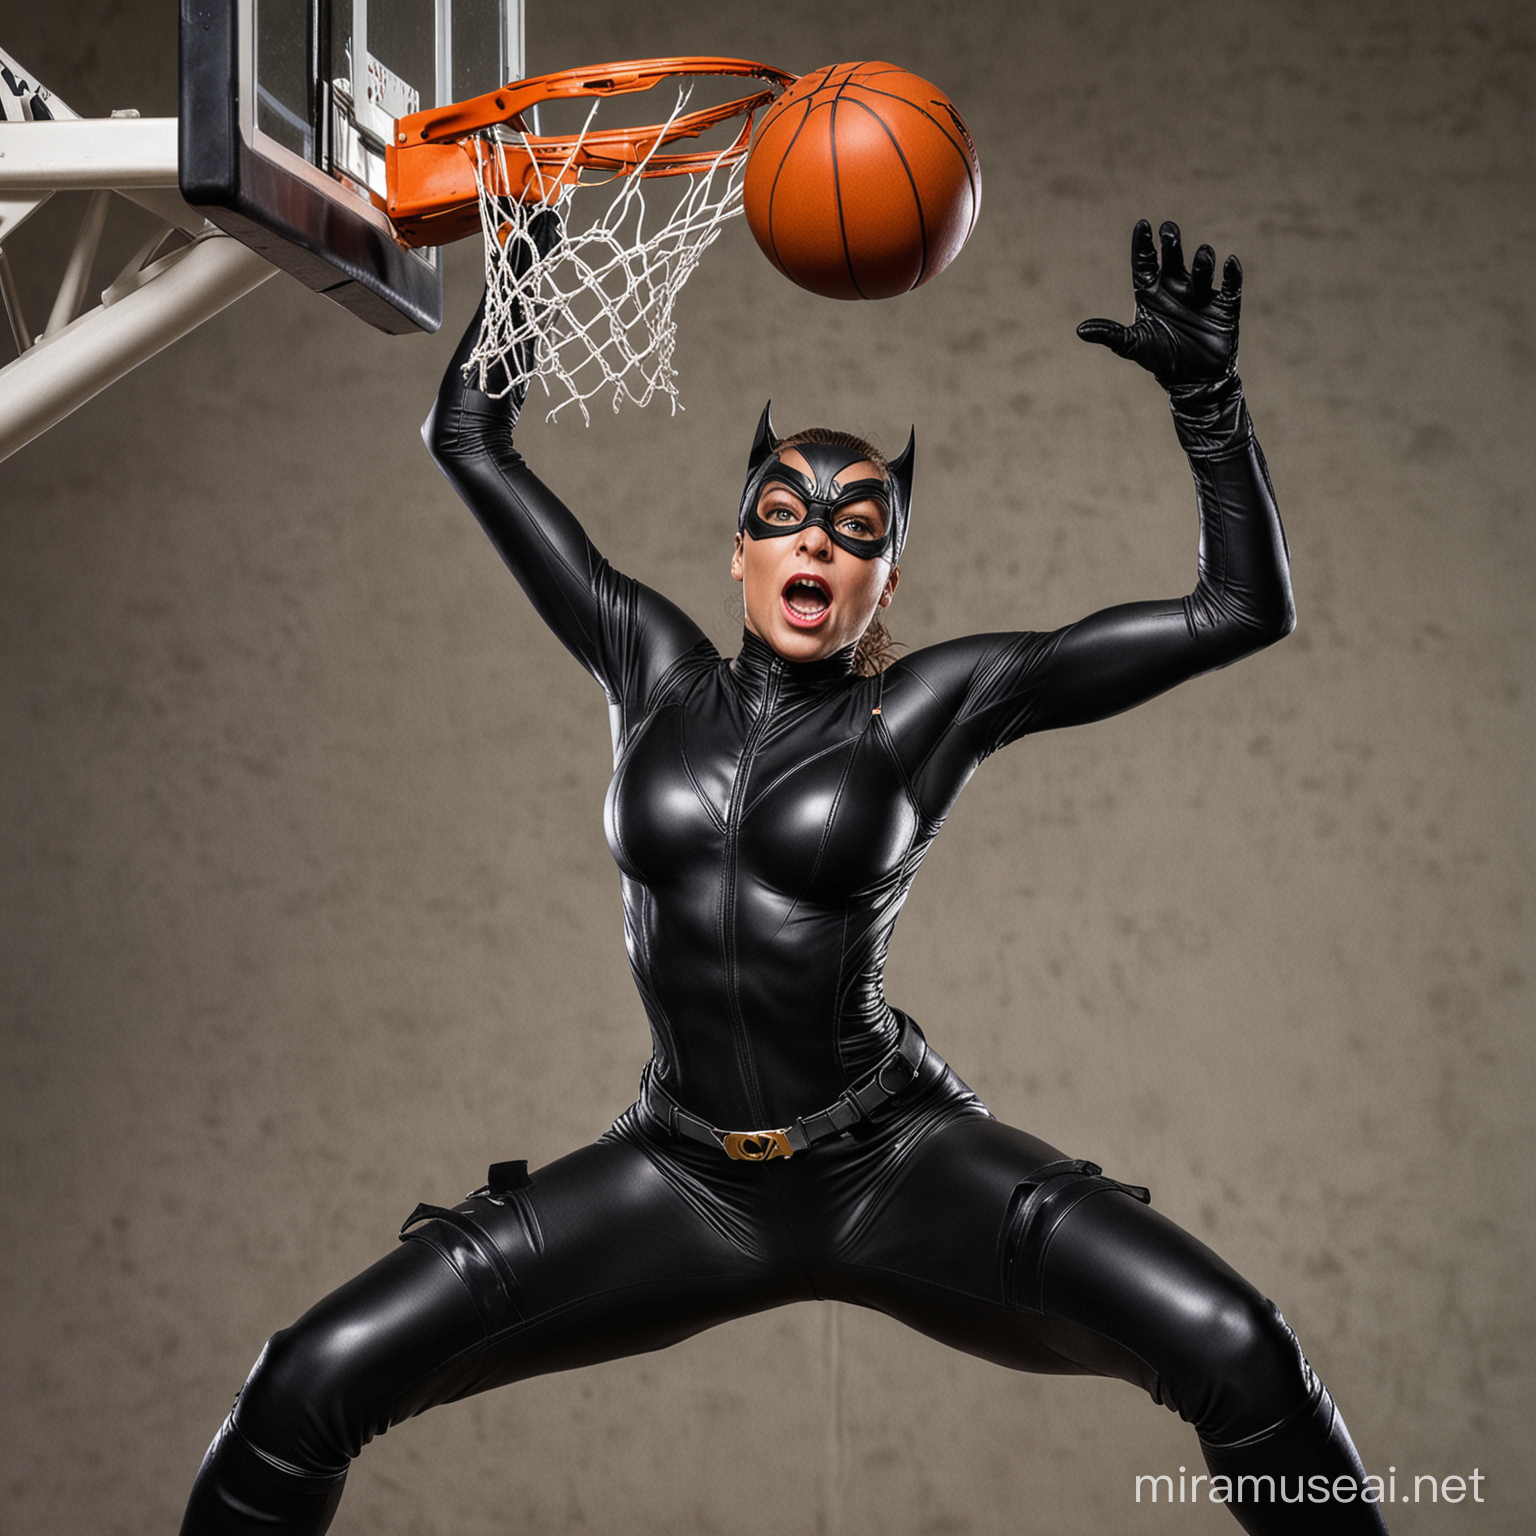 Catwoman Slam Dunking Basketball in Gotham City Streets